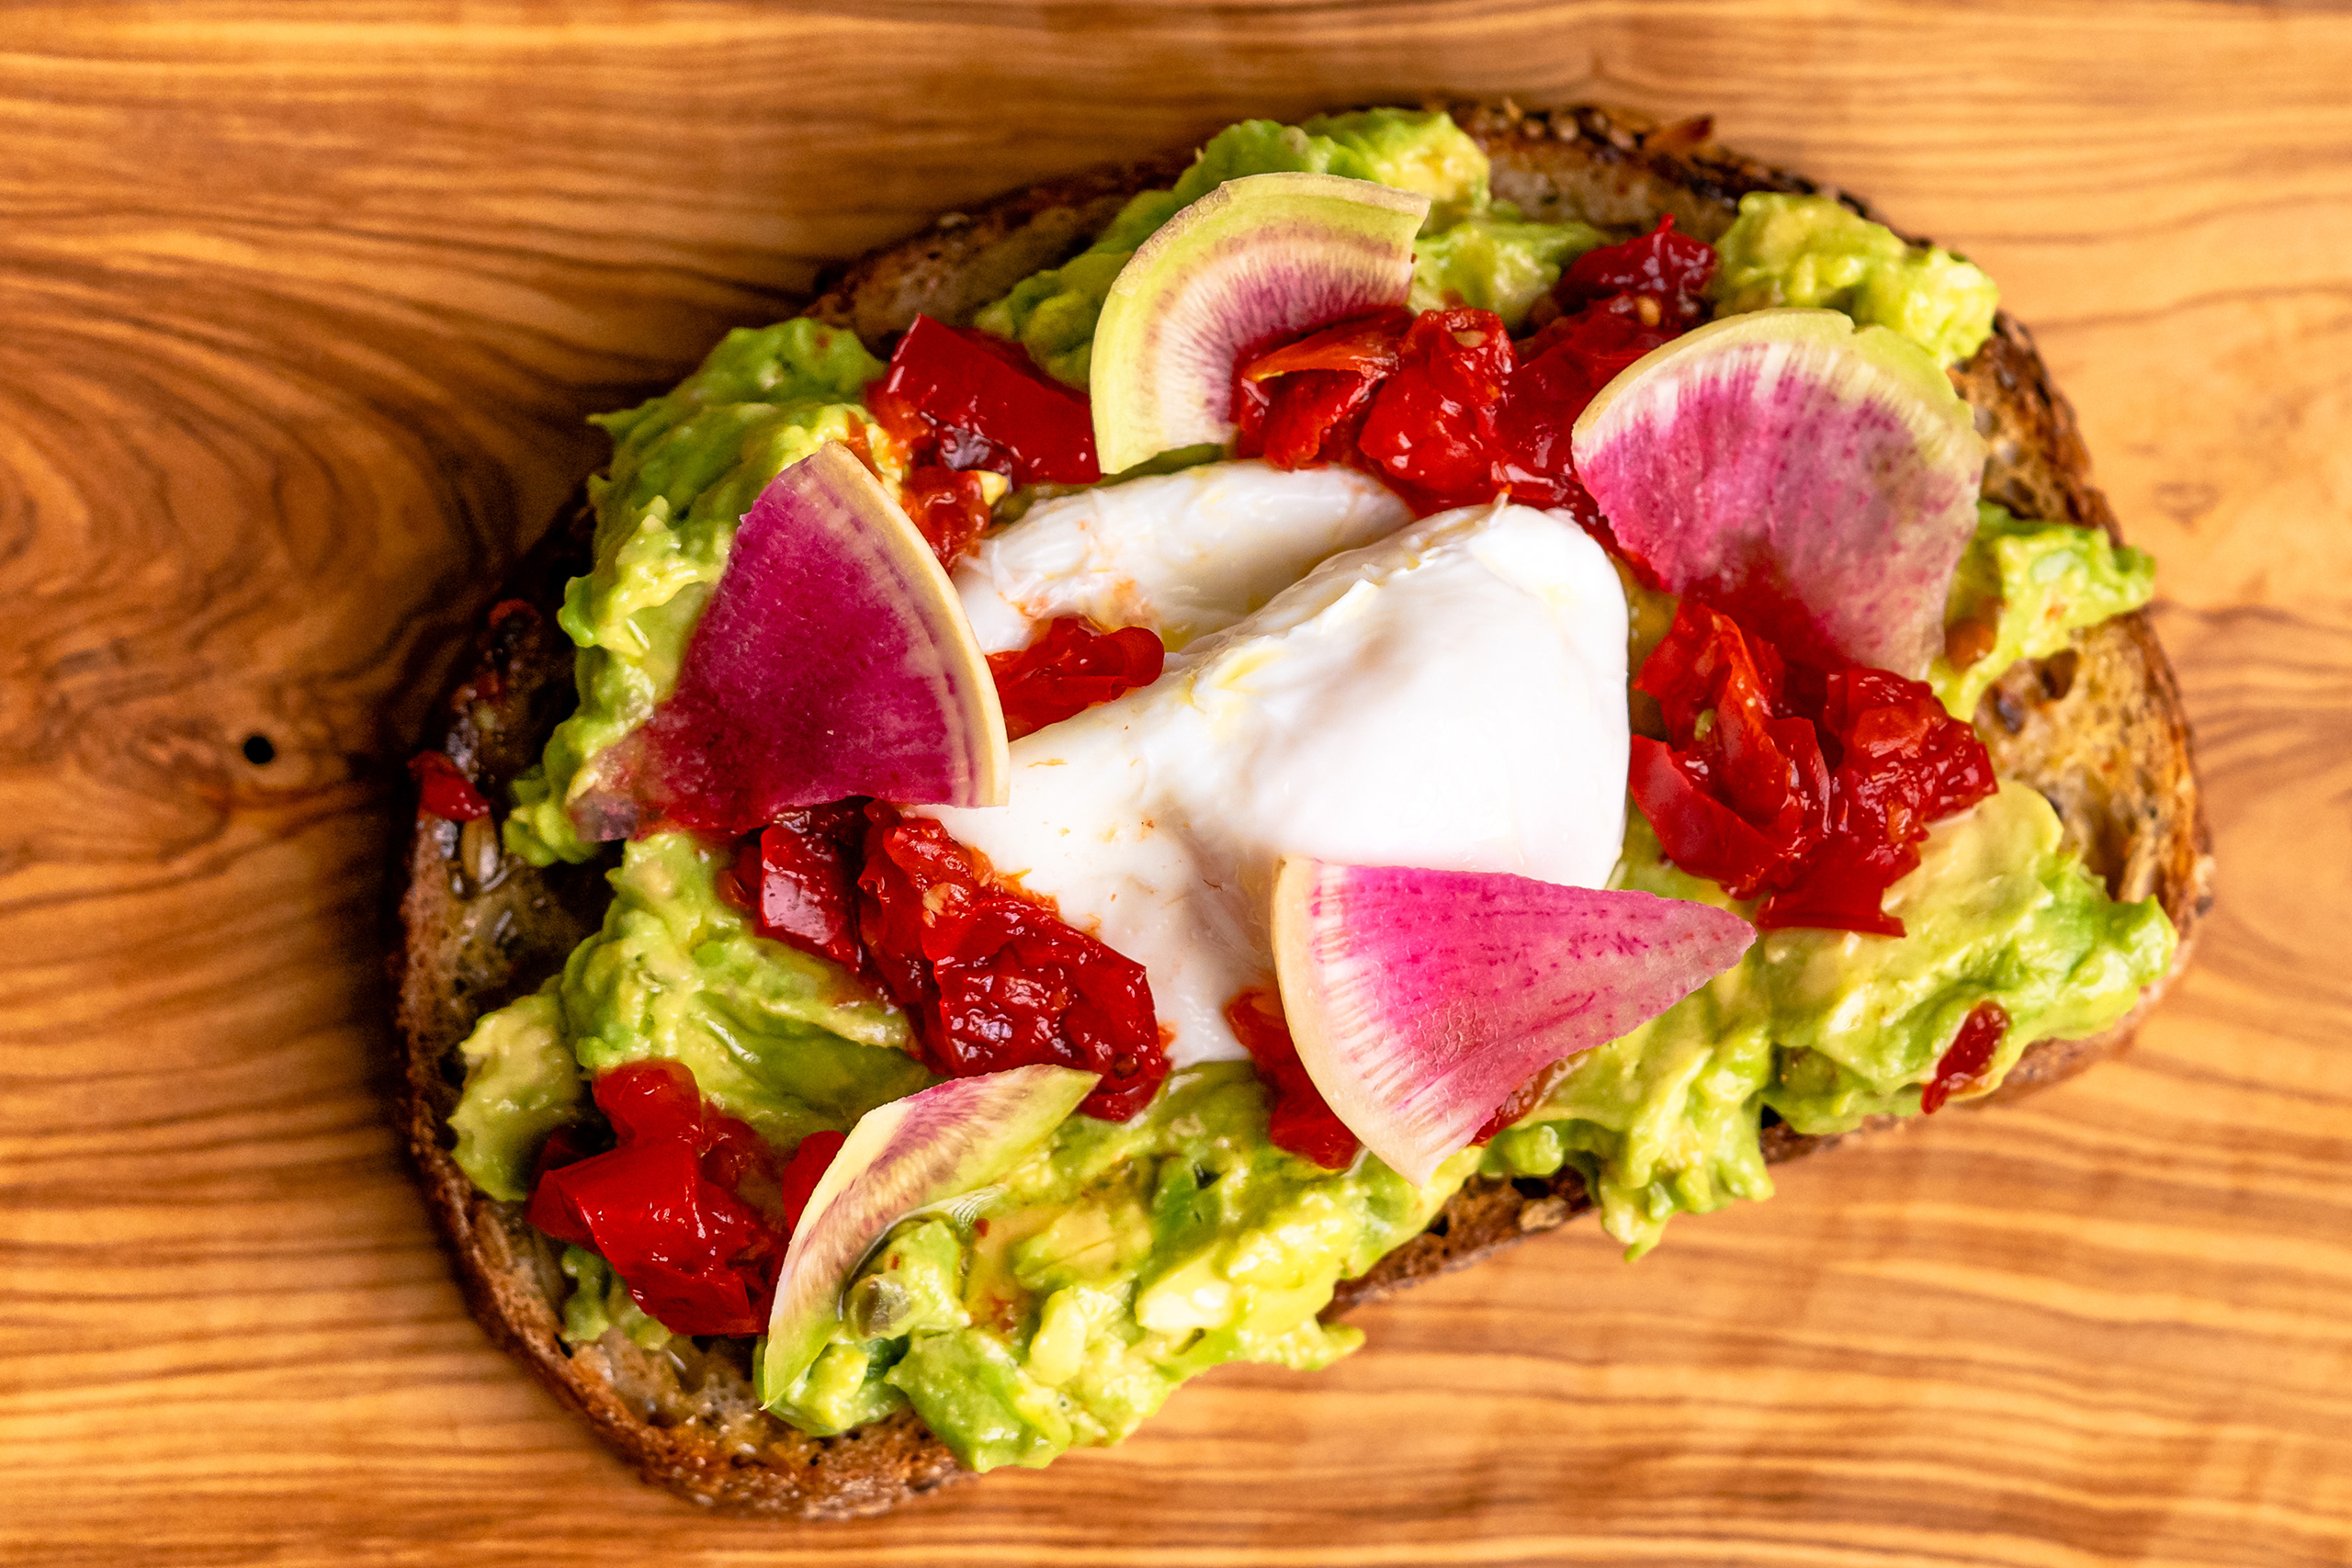 Aerial view of avocado toast with medjool dates, placed on a wooden surface.